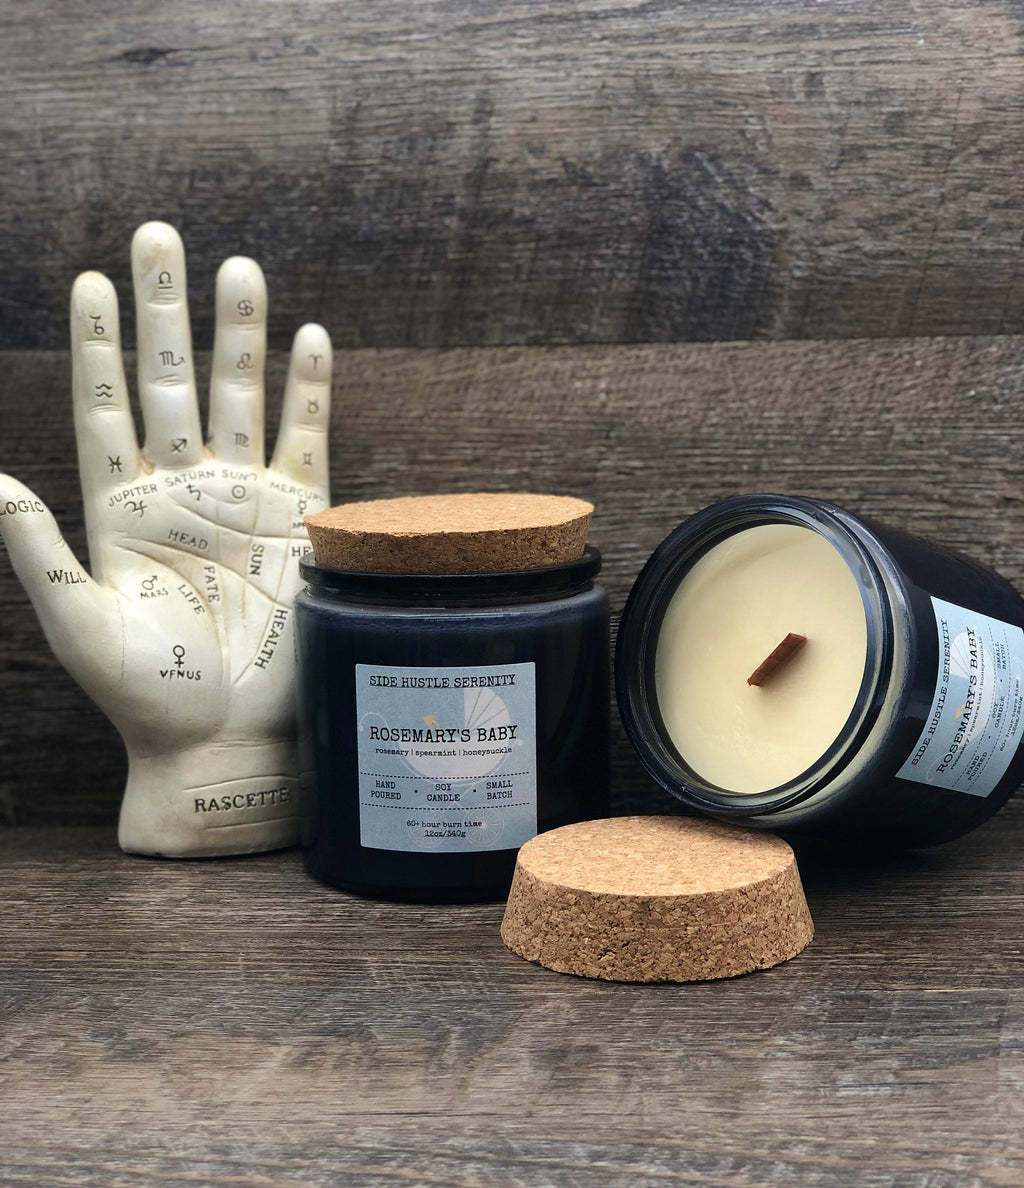 ROSEMARY'S BABY | Rosemary + Spearmint + Honeysuckle Scented Soy Candle | 12oz Candle Jar | Wood Wick | Spooky | Horror Film Candle | Boo